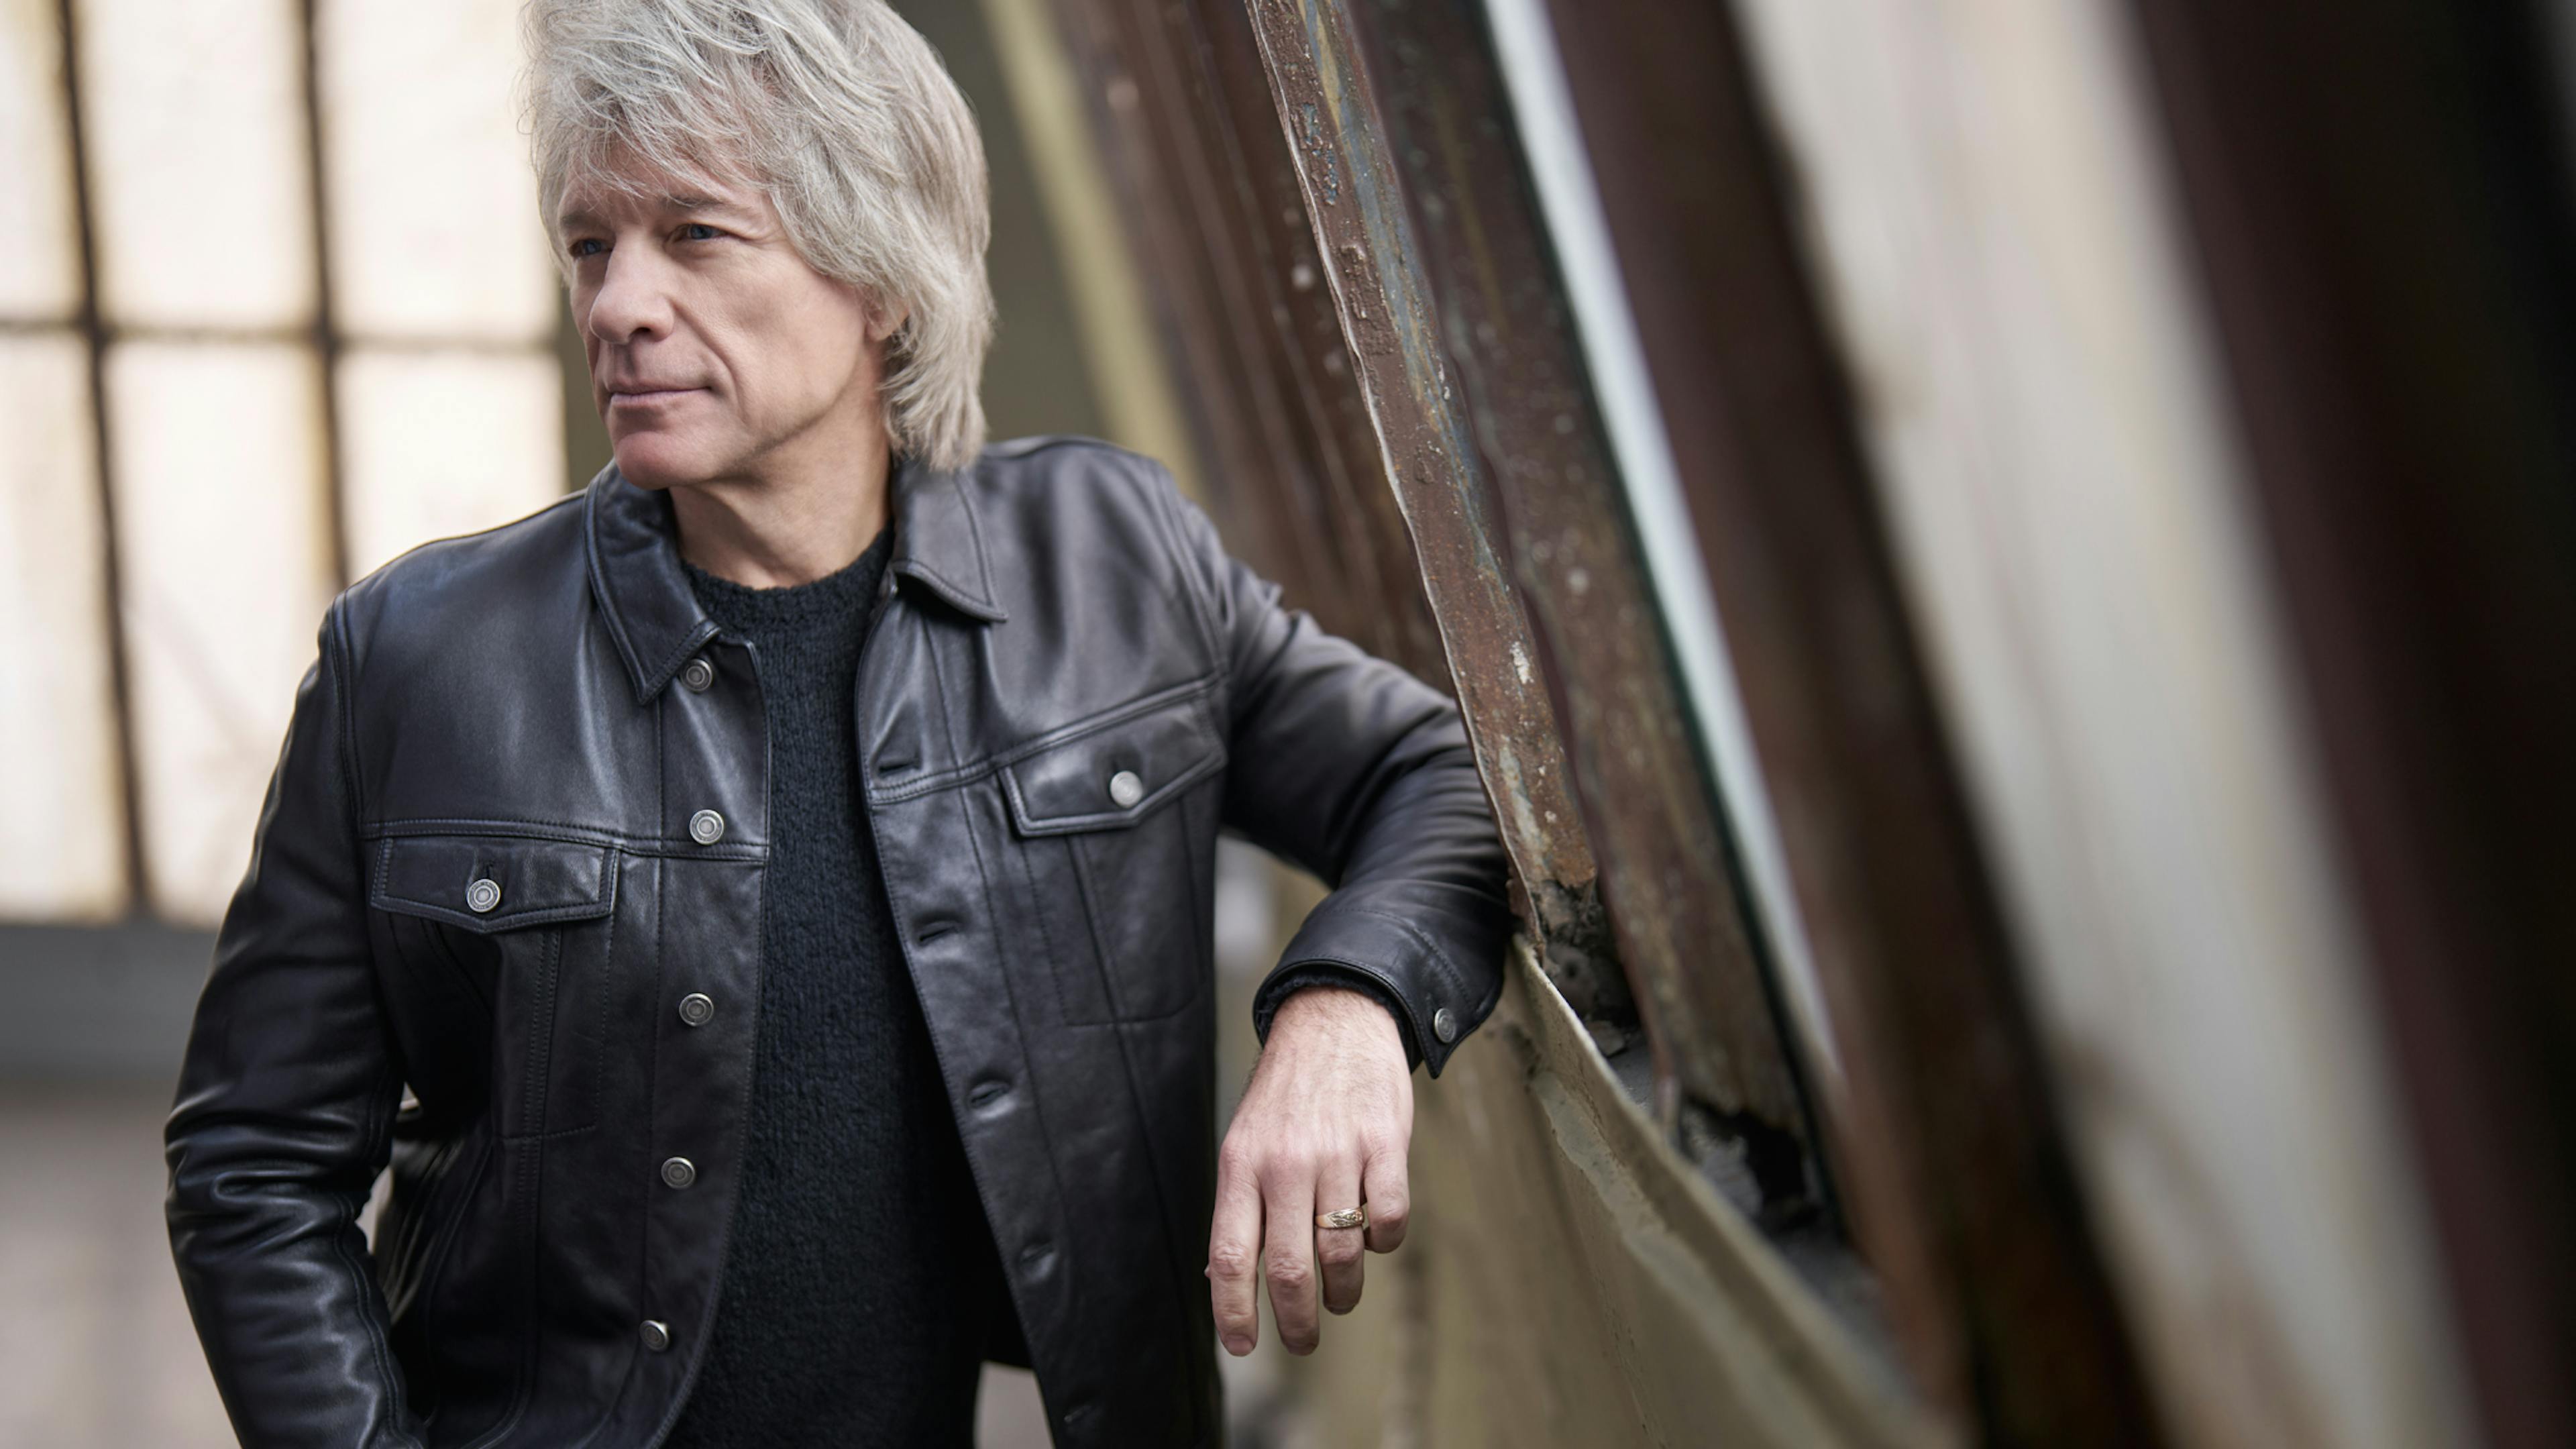 Jon Bon Jovi: “I didn’t want to perform half-assed. If it was the end, I was good with that”